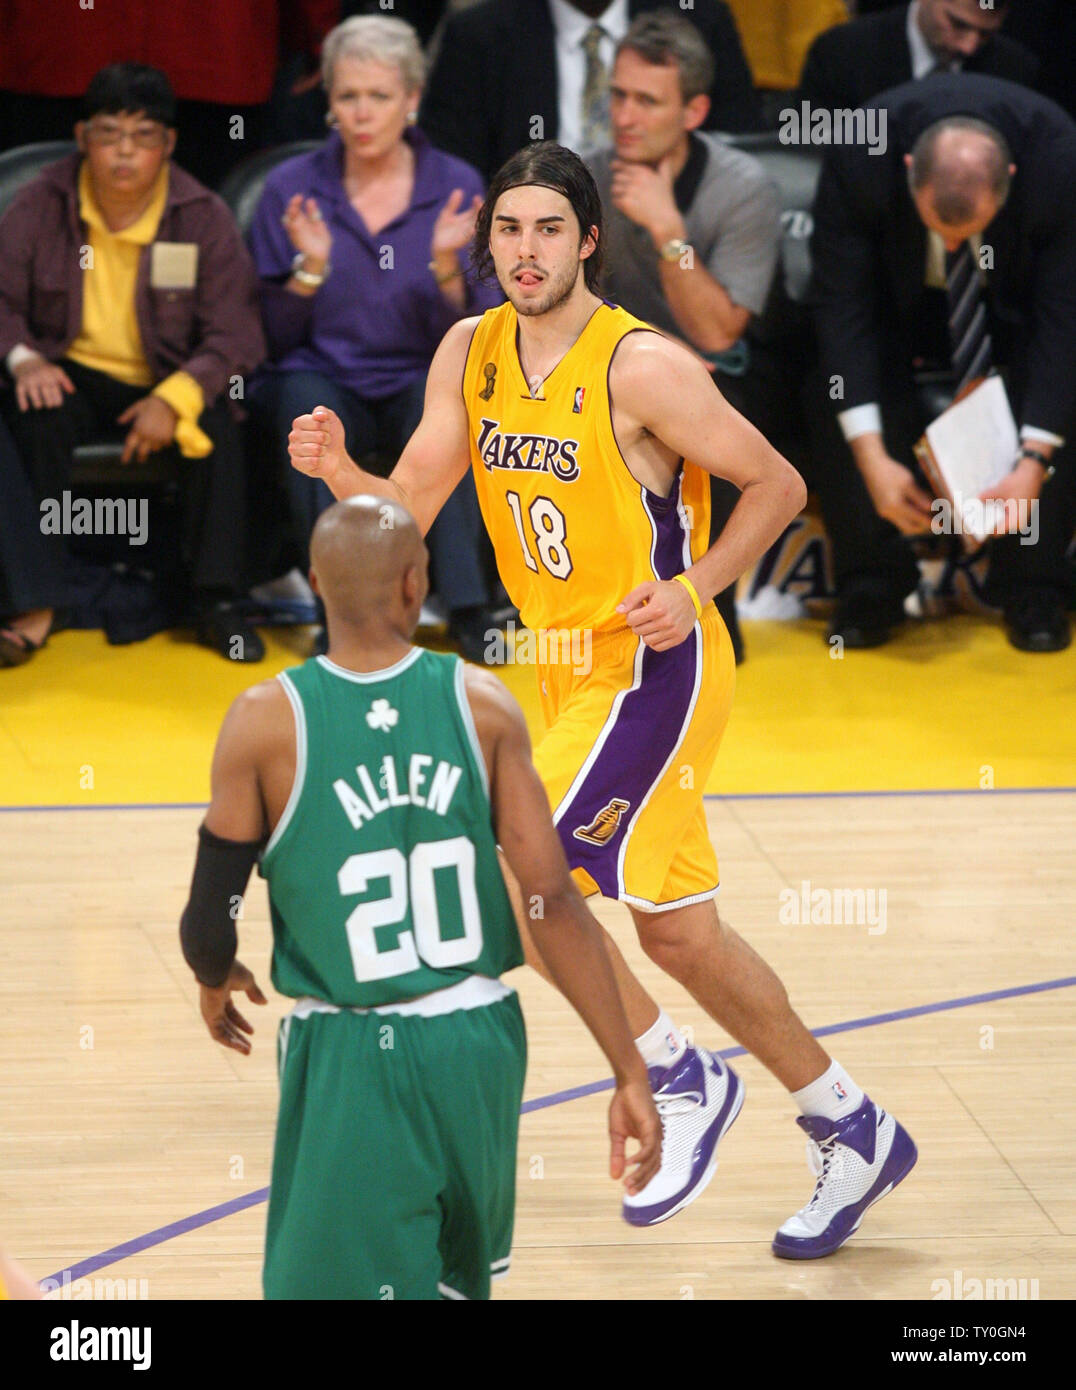 Los Angeles Lakers' Sasha Vujacic (18) celebrates his three-pointer late in the second half as Boston Celtics Ray Allen looks on in Game 3 of the NBA finals at Staples Center in Los Angeles on June 10, 2008. The Lakers defeated the Celtics 87-81 to stave off a 3-0 hole in the best-of-seven series. The Celtics lead the series 2-1.  (UPI Photo/Lazlo Fitz) Stock Photo